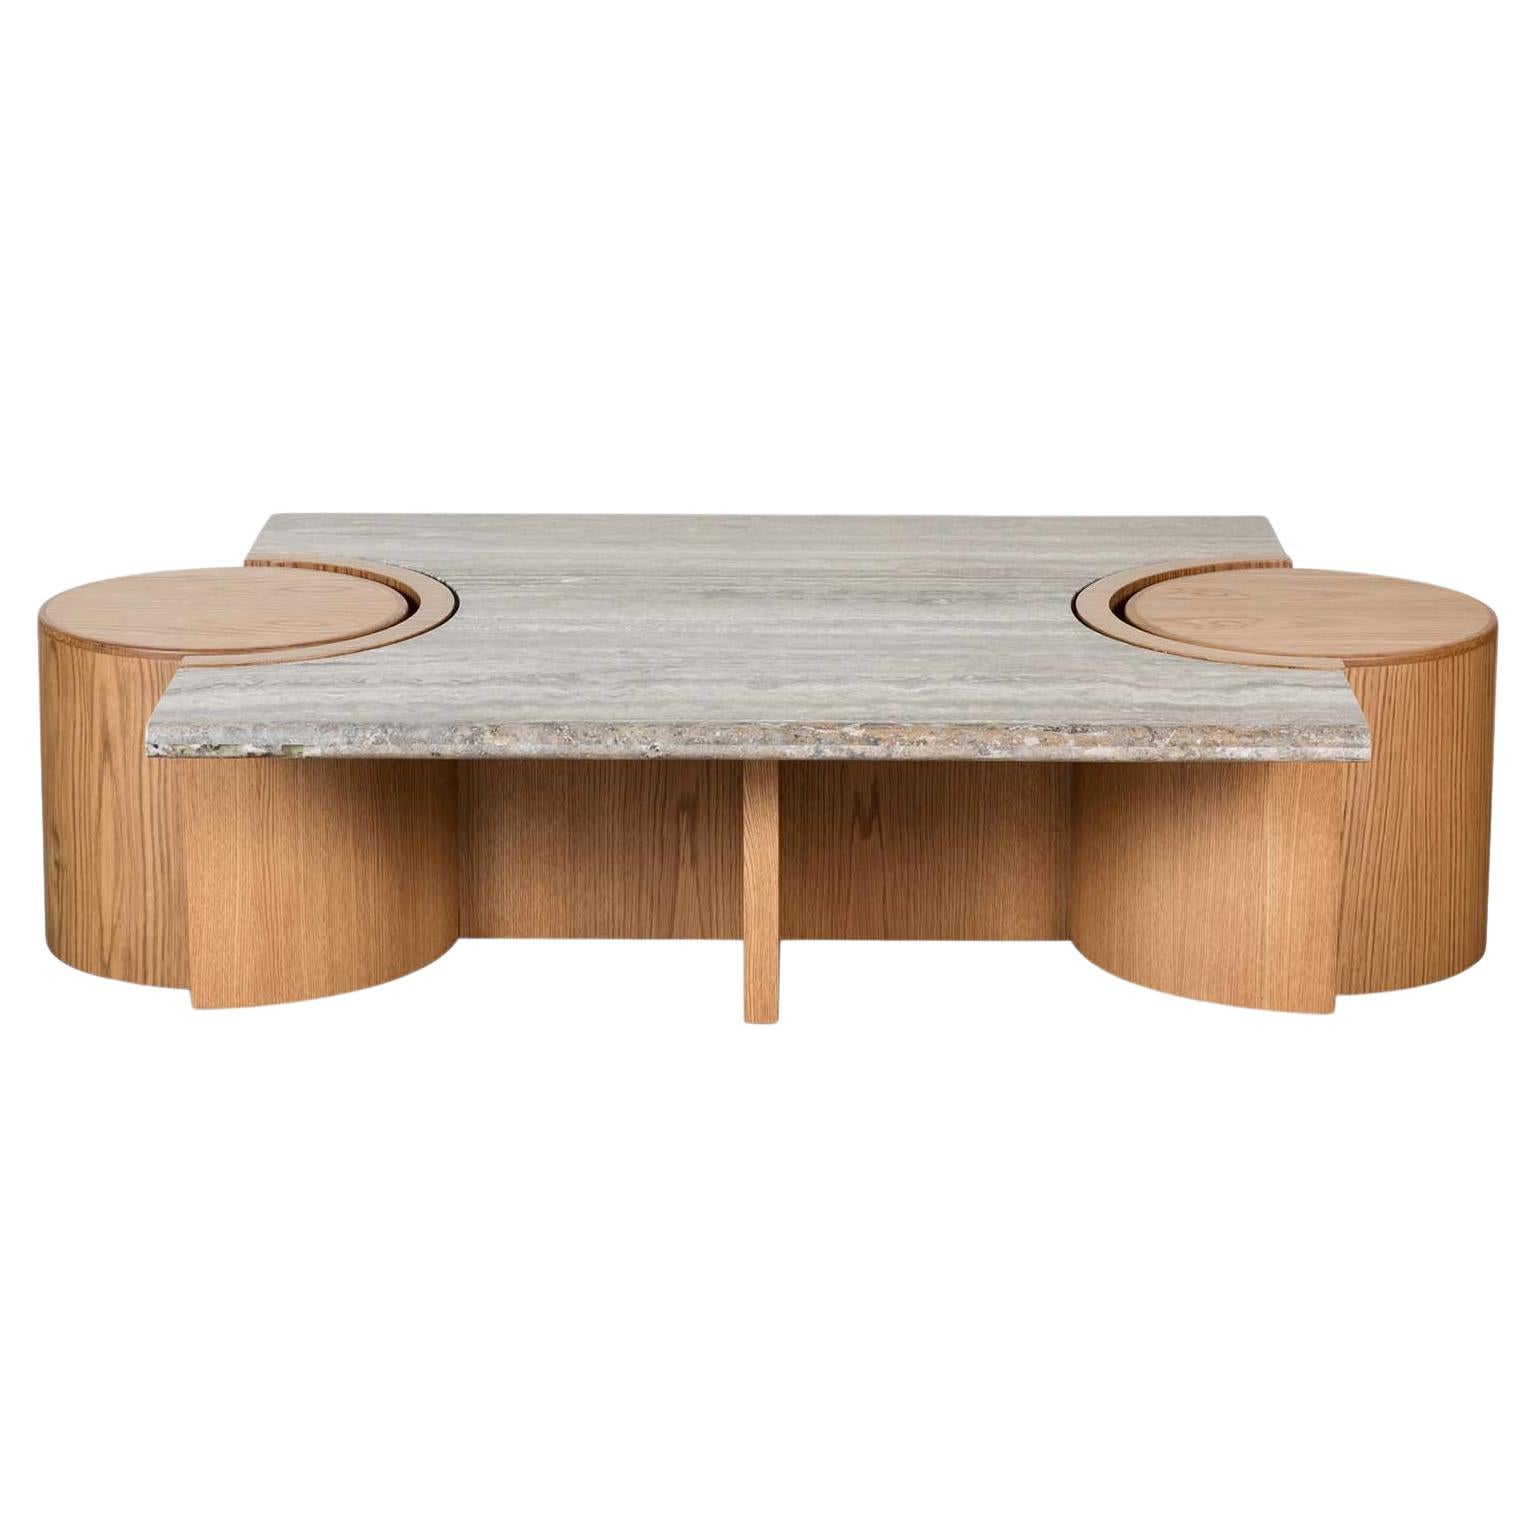 Travertine and Oak Prospect Coffee Table by Lawson-Fenning For Sale